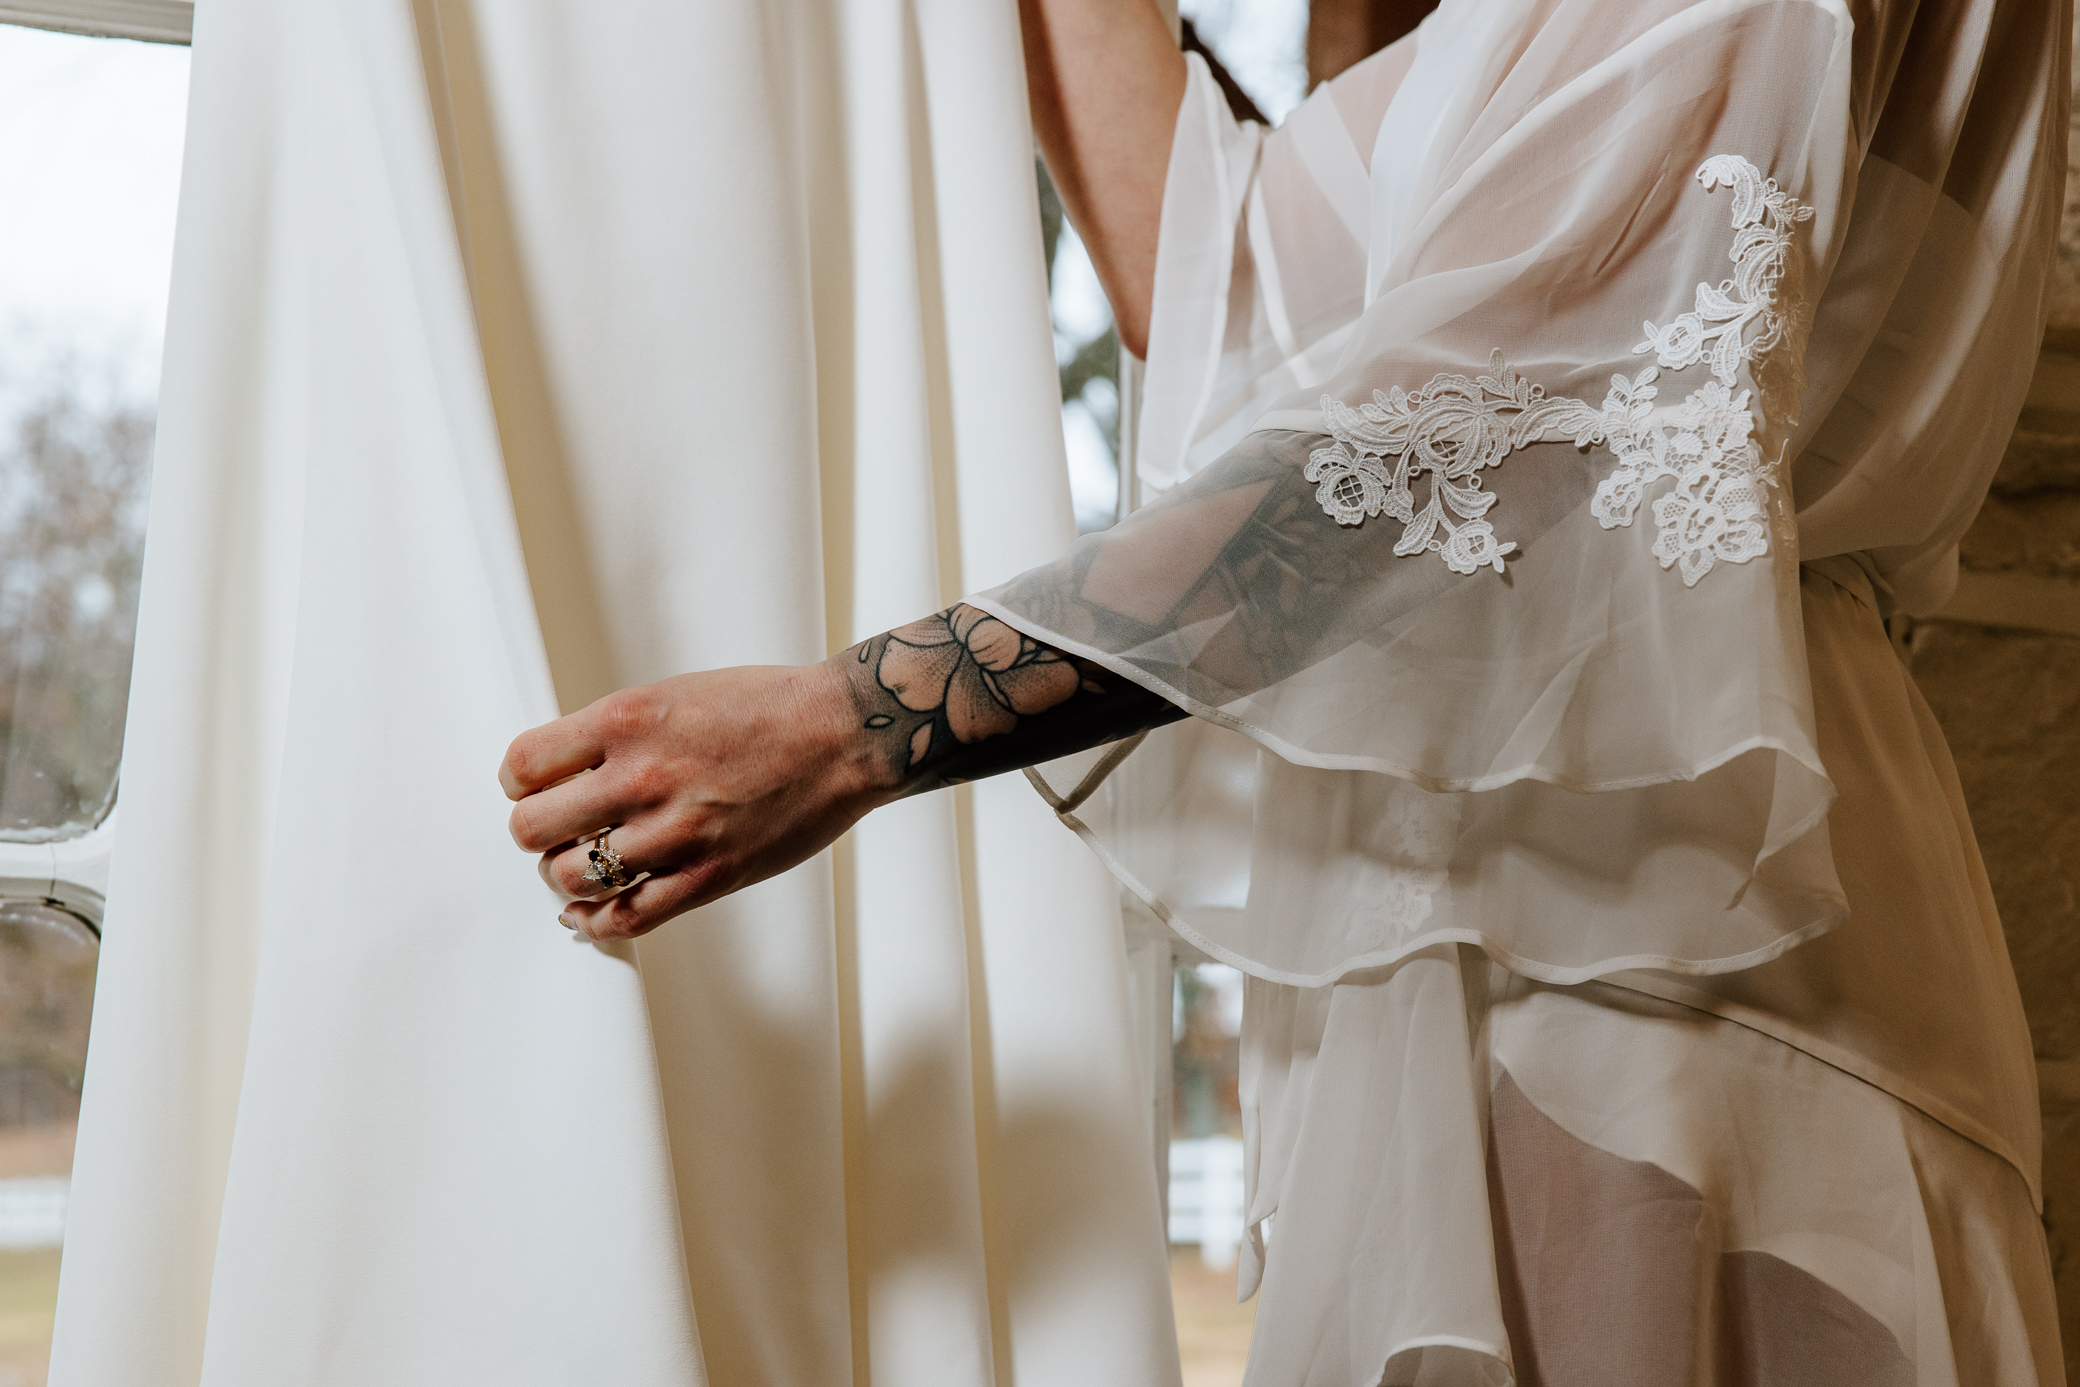 A bride's hand holds the fabric of her dress as it hangs above a window. She's wearing a sheer white lace robe, her black and white diamond engagement ring, and her arm is covered in a floral tattoo sleeve.